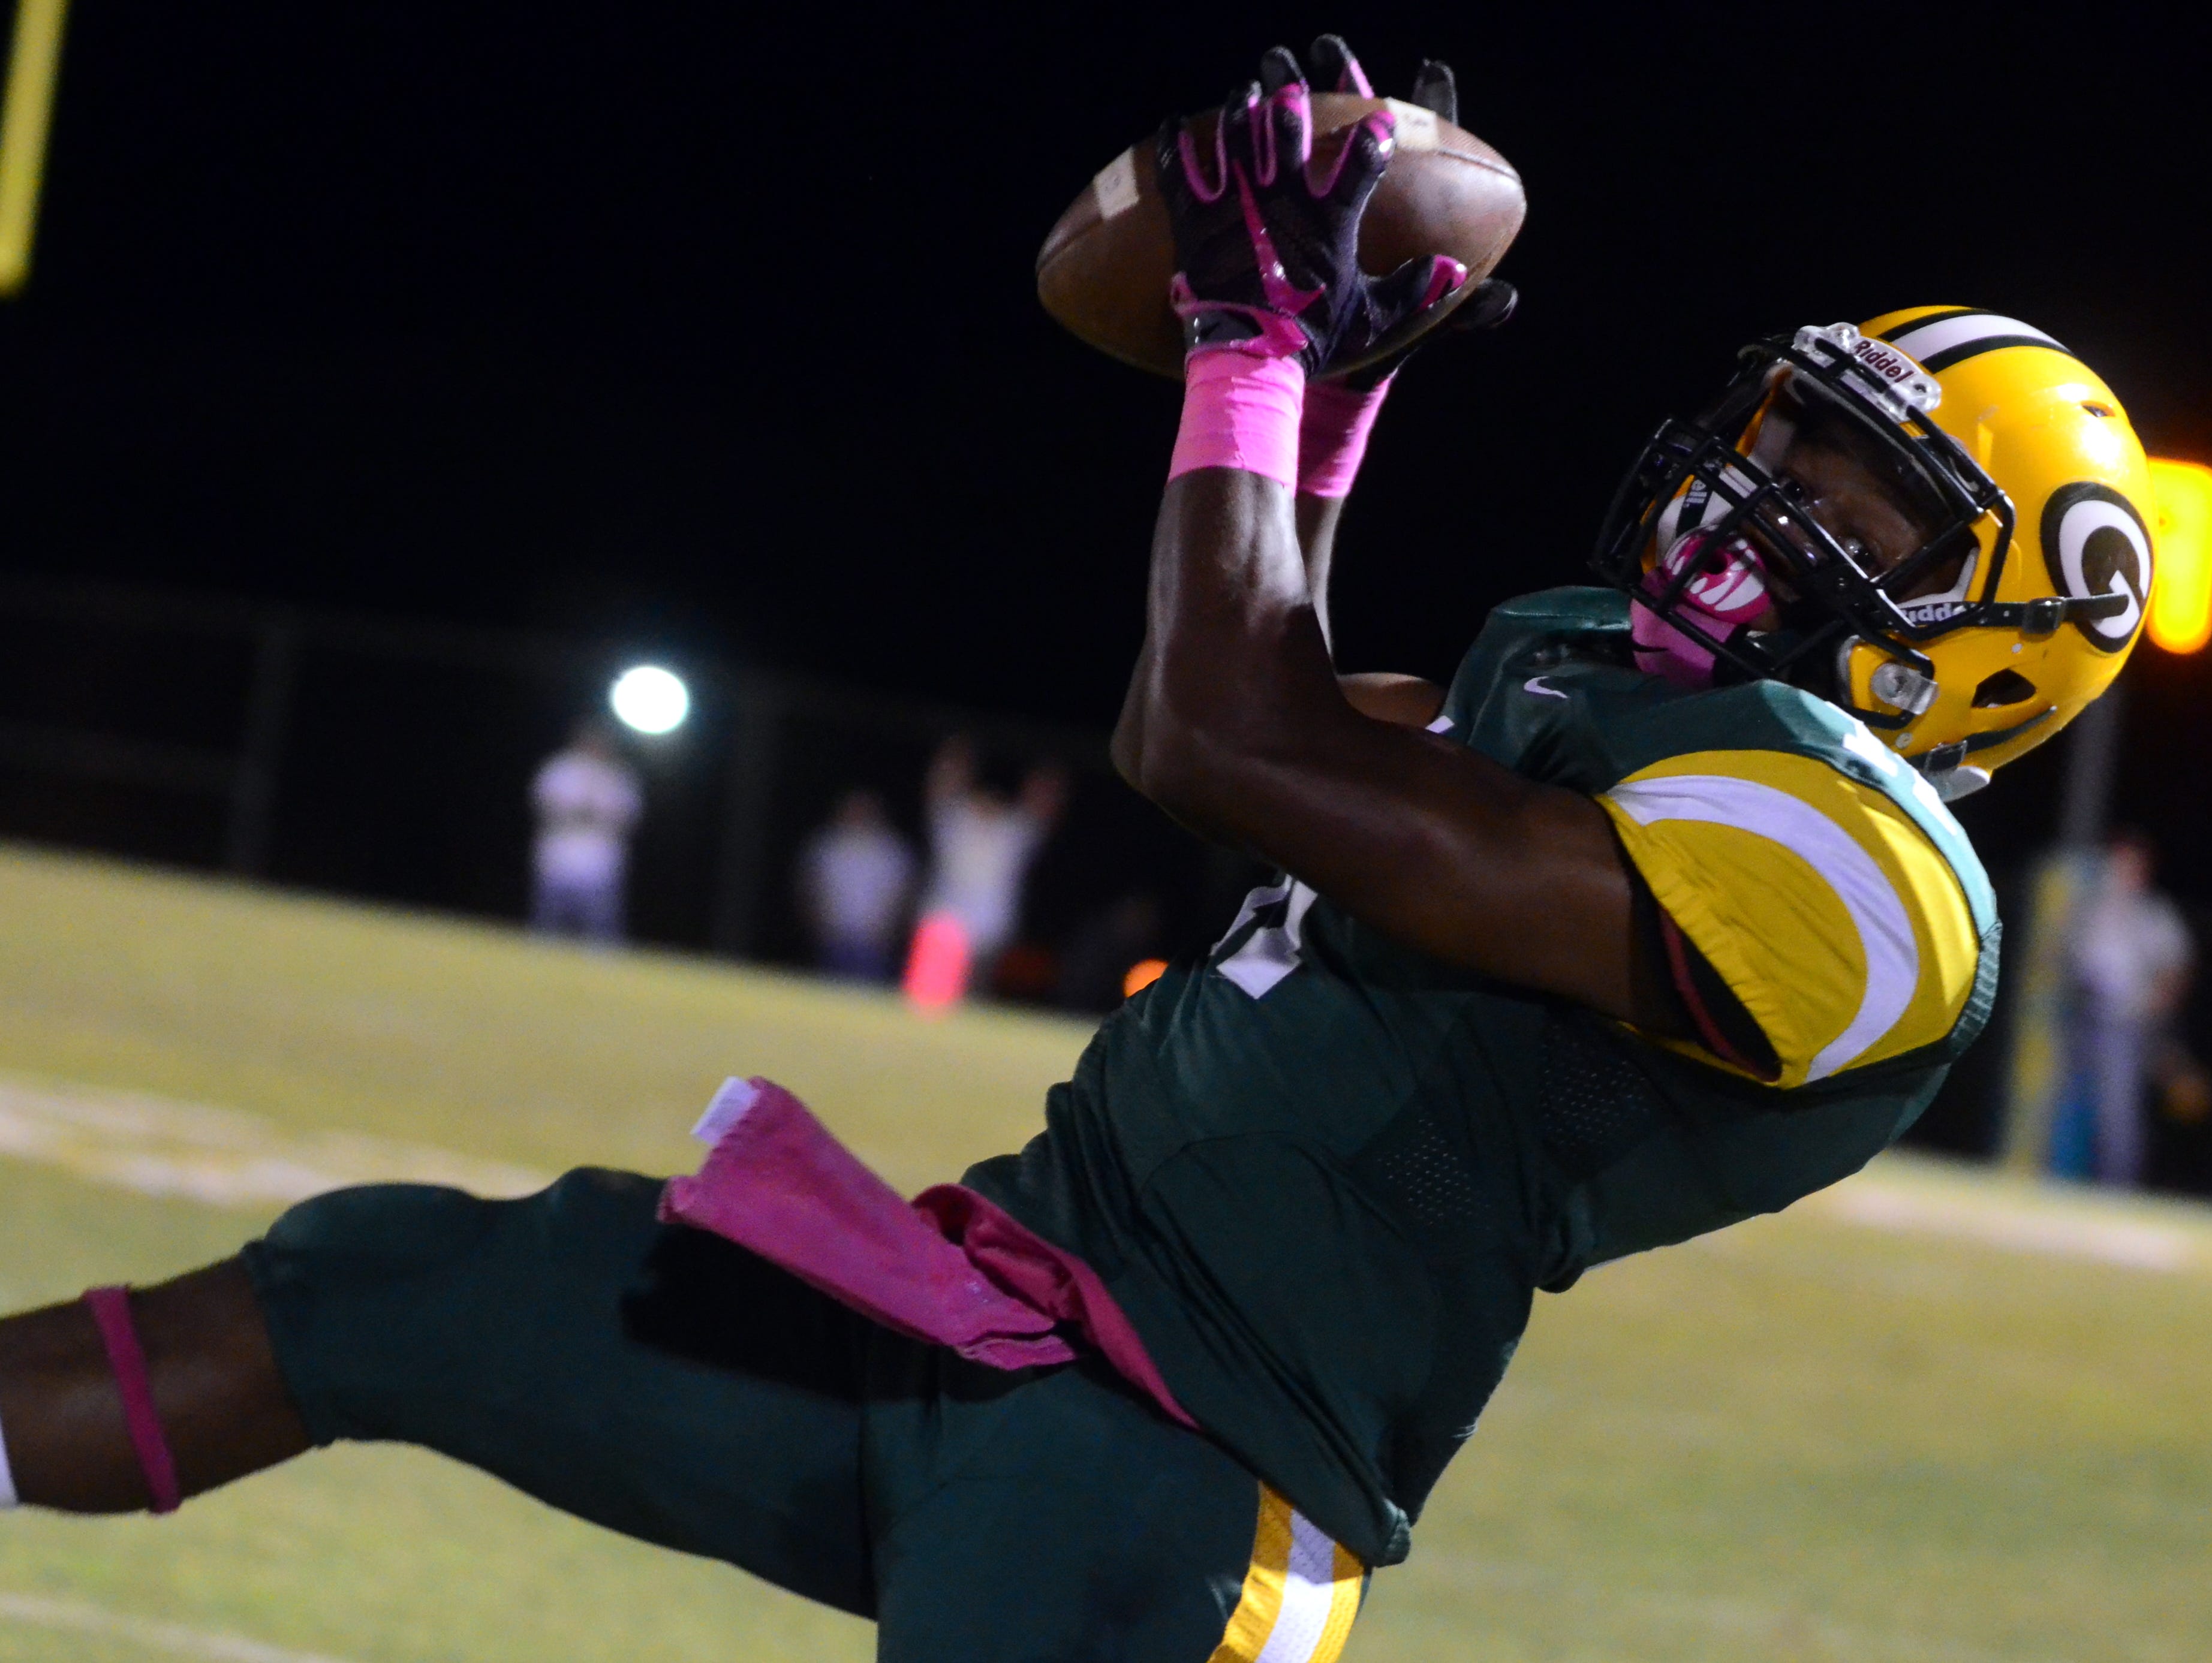 Gallatin senior Dezmond Chambers and his Green Wave teammates visit Hillsboro Friday evening, and a victory would give them a shot at the Region 6-5A championship next week.